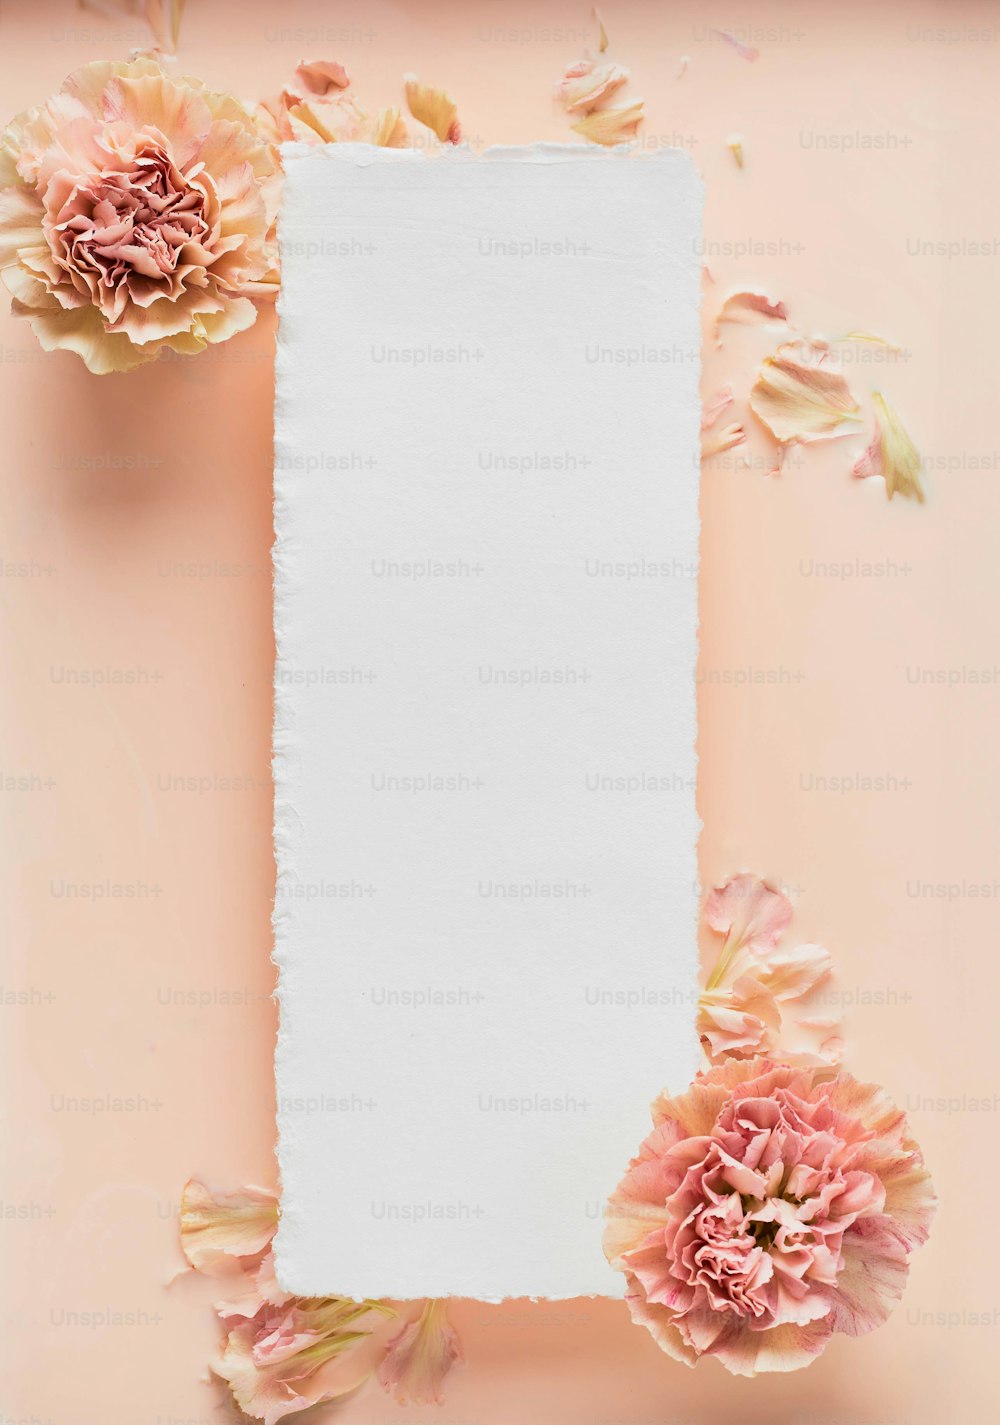 a blank paper surrounded by flowers on a pink background